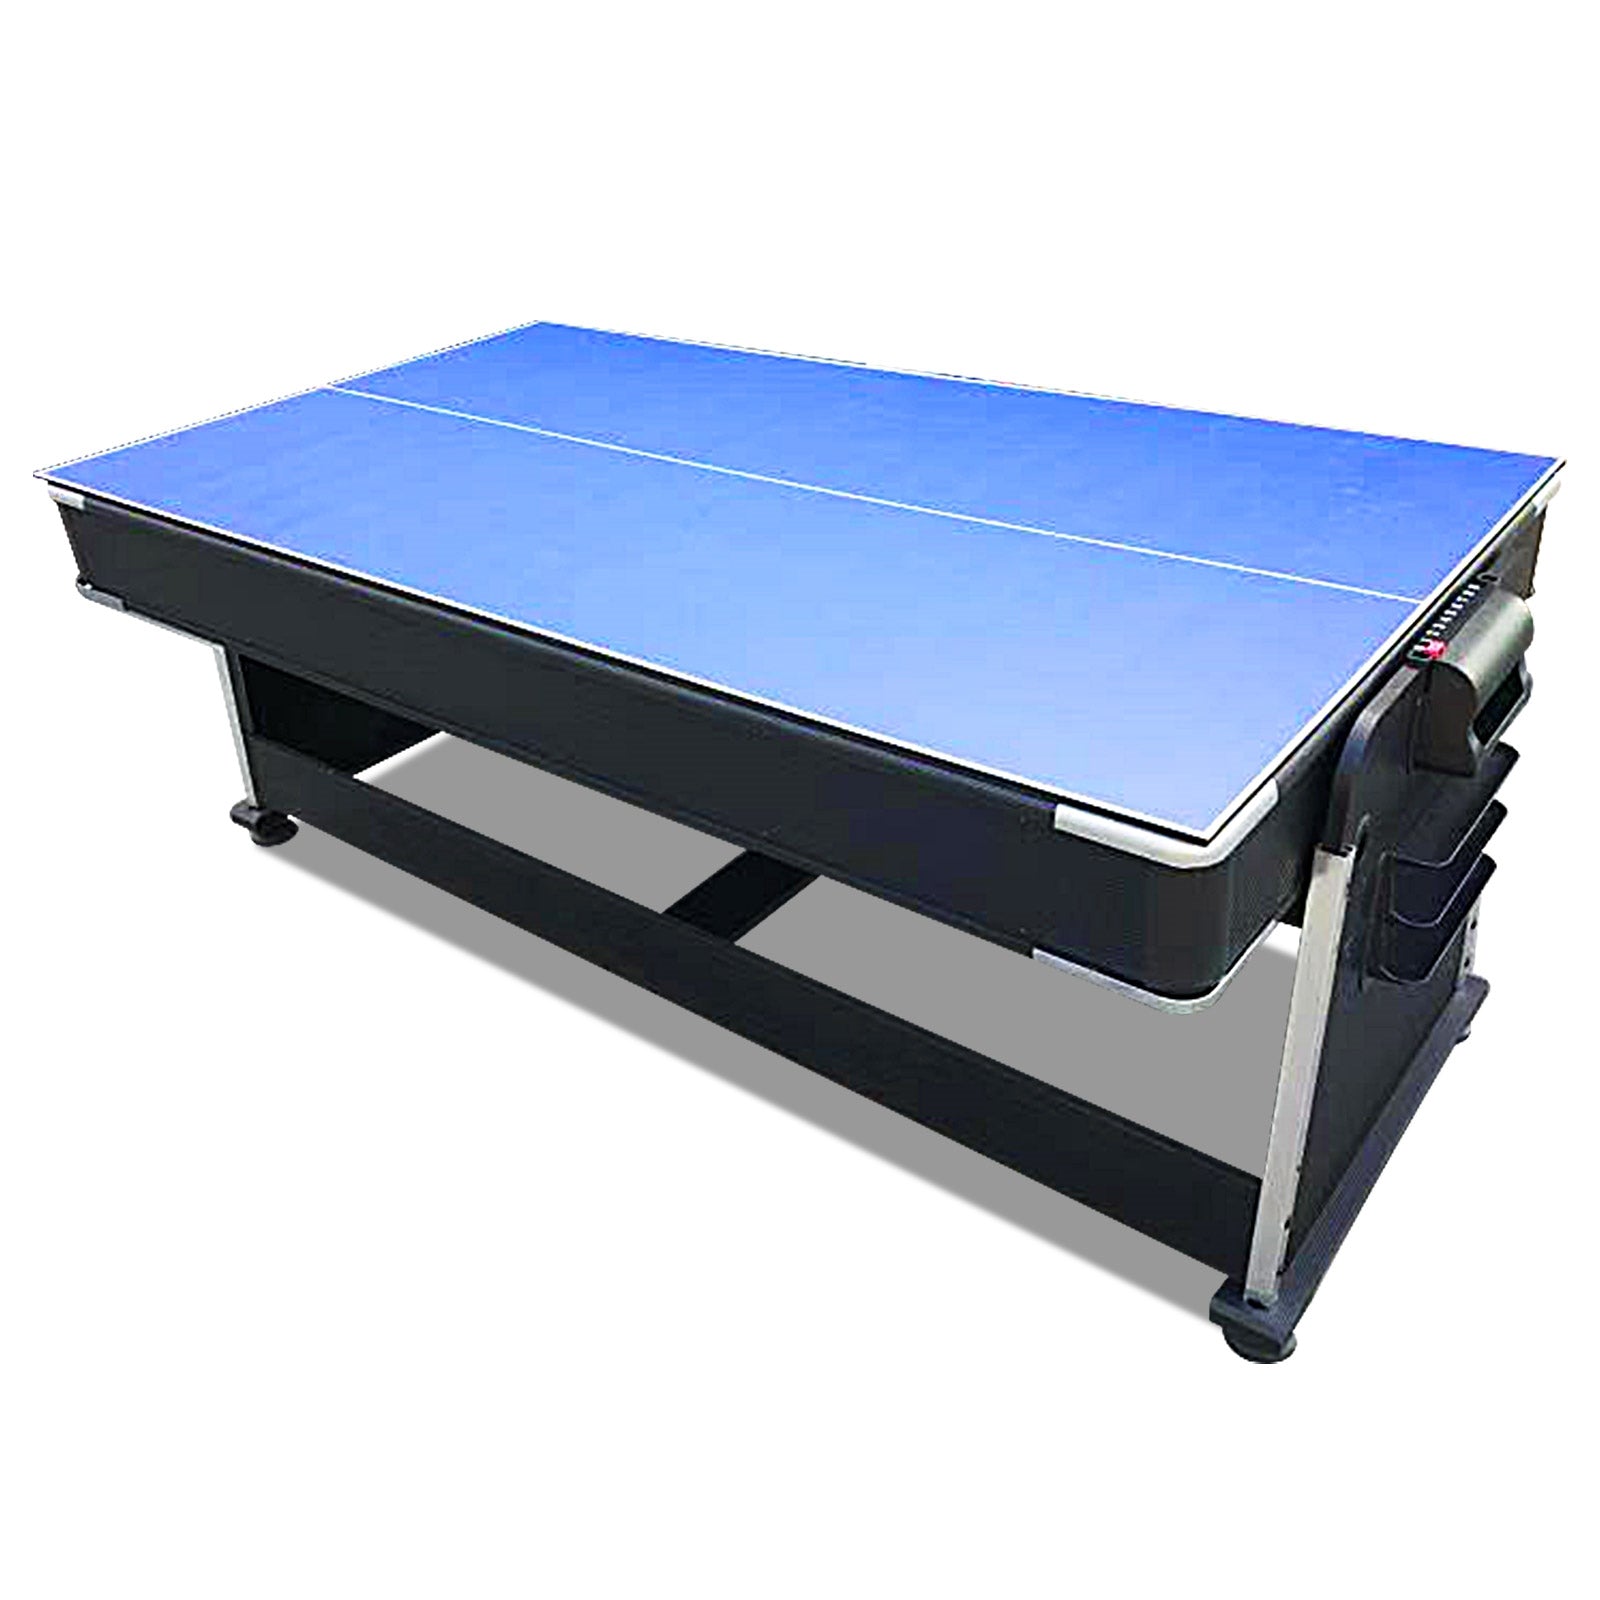 MACE 7Ft 4-In-1 Convertible Air Hockey / Pool Billiards /Dining table /Table Tennis Table Blue/Black Felt For Billiard Gaming Room Free Accessory